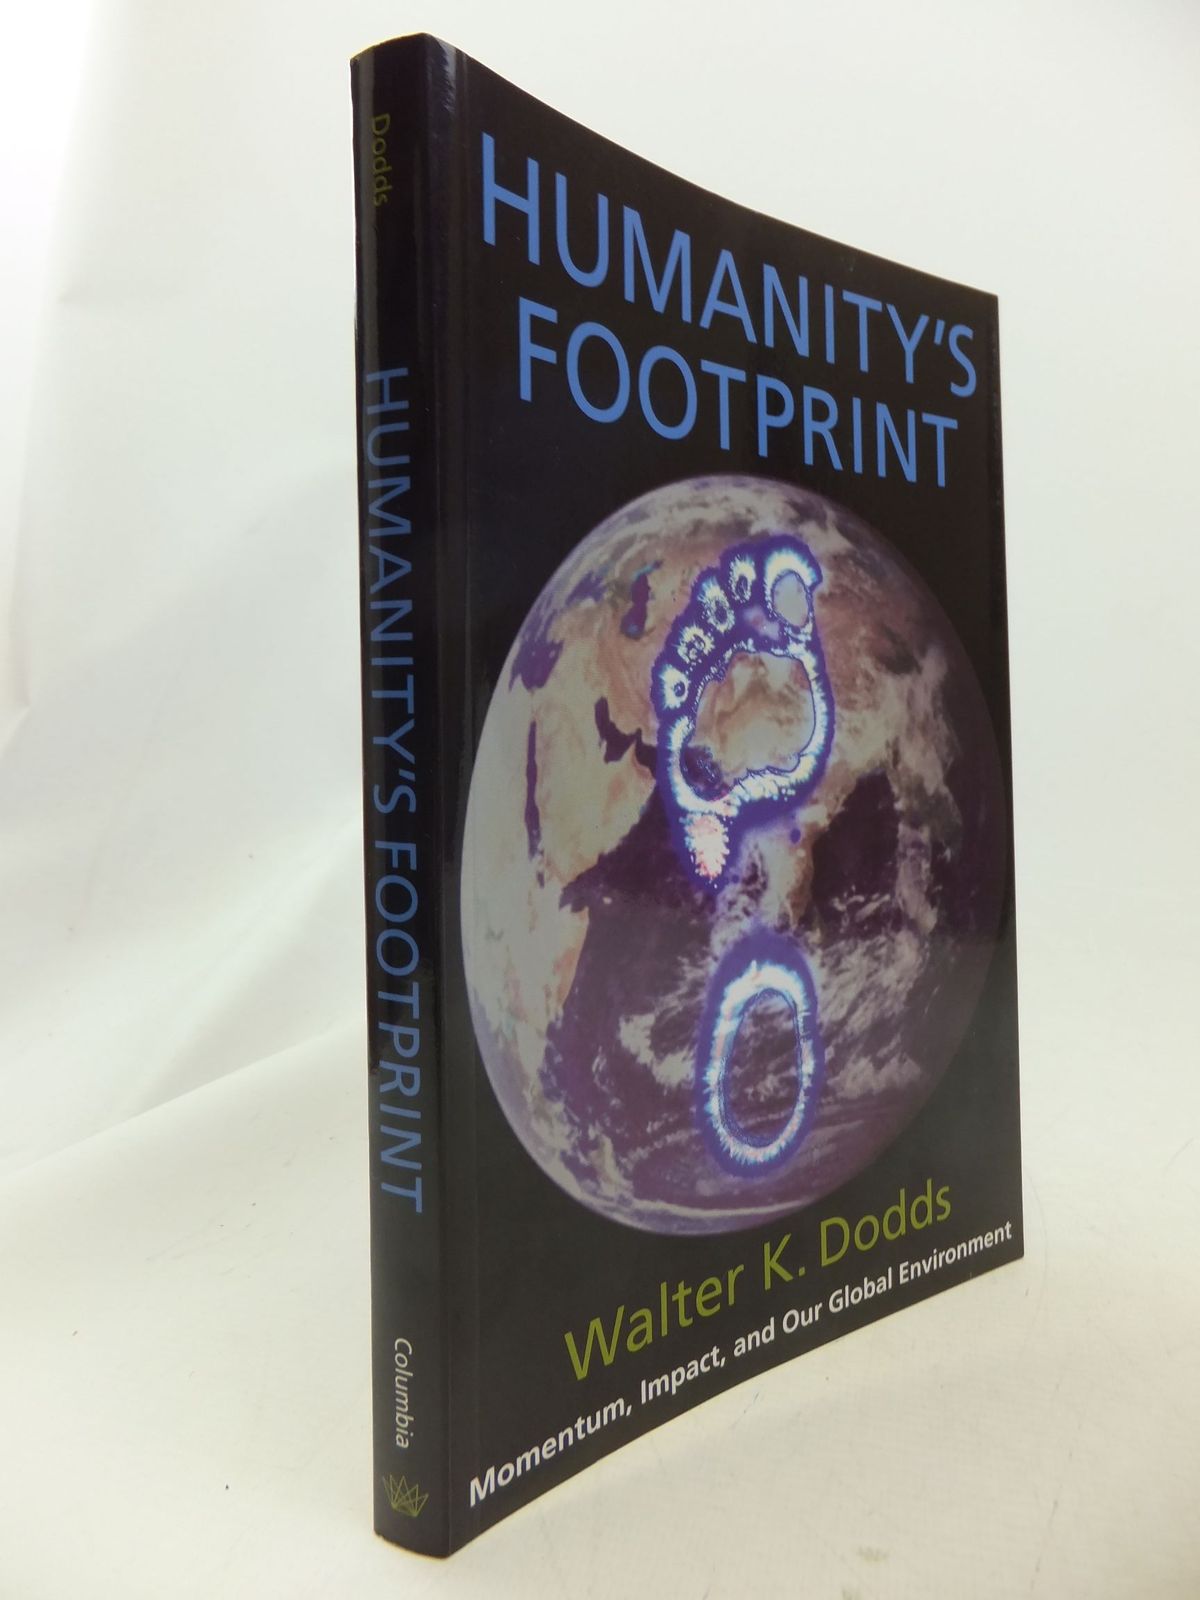 Photo of HUMANITY'S FOOTPRINT MOMENTUM, IMPACT, AND OUR GLOBAL ENVIROMENT- Stock Number: 1710819